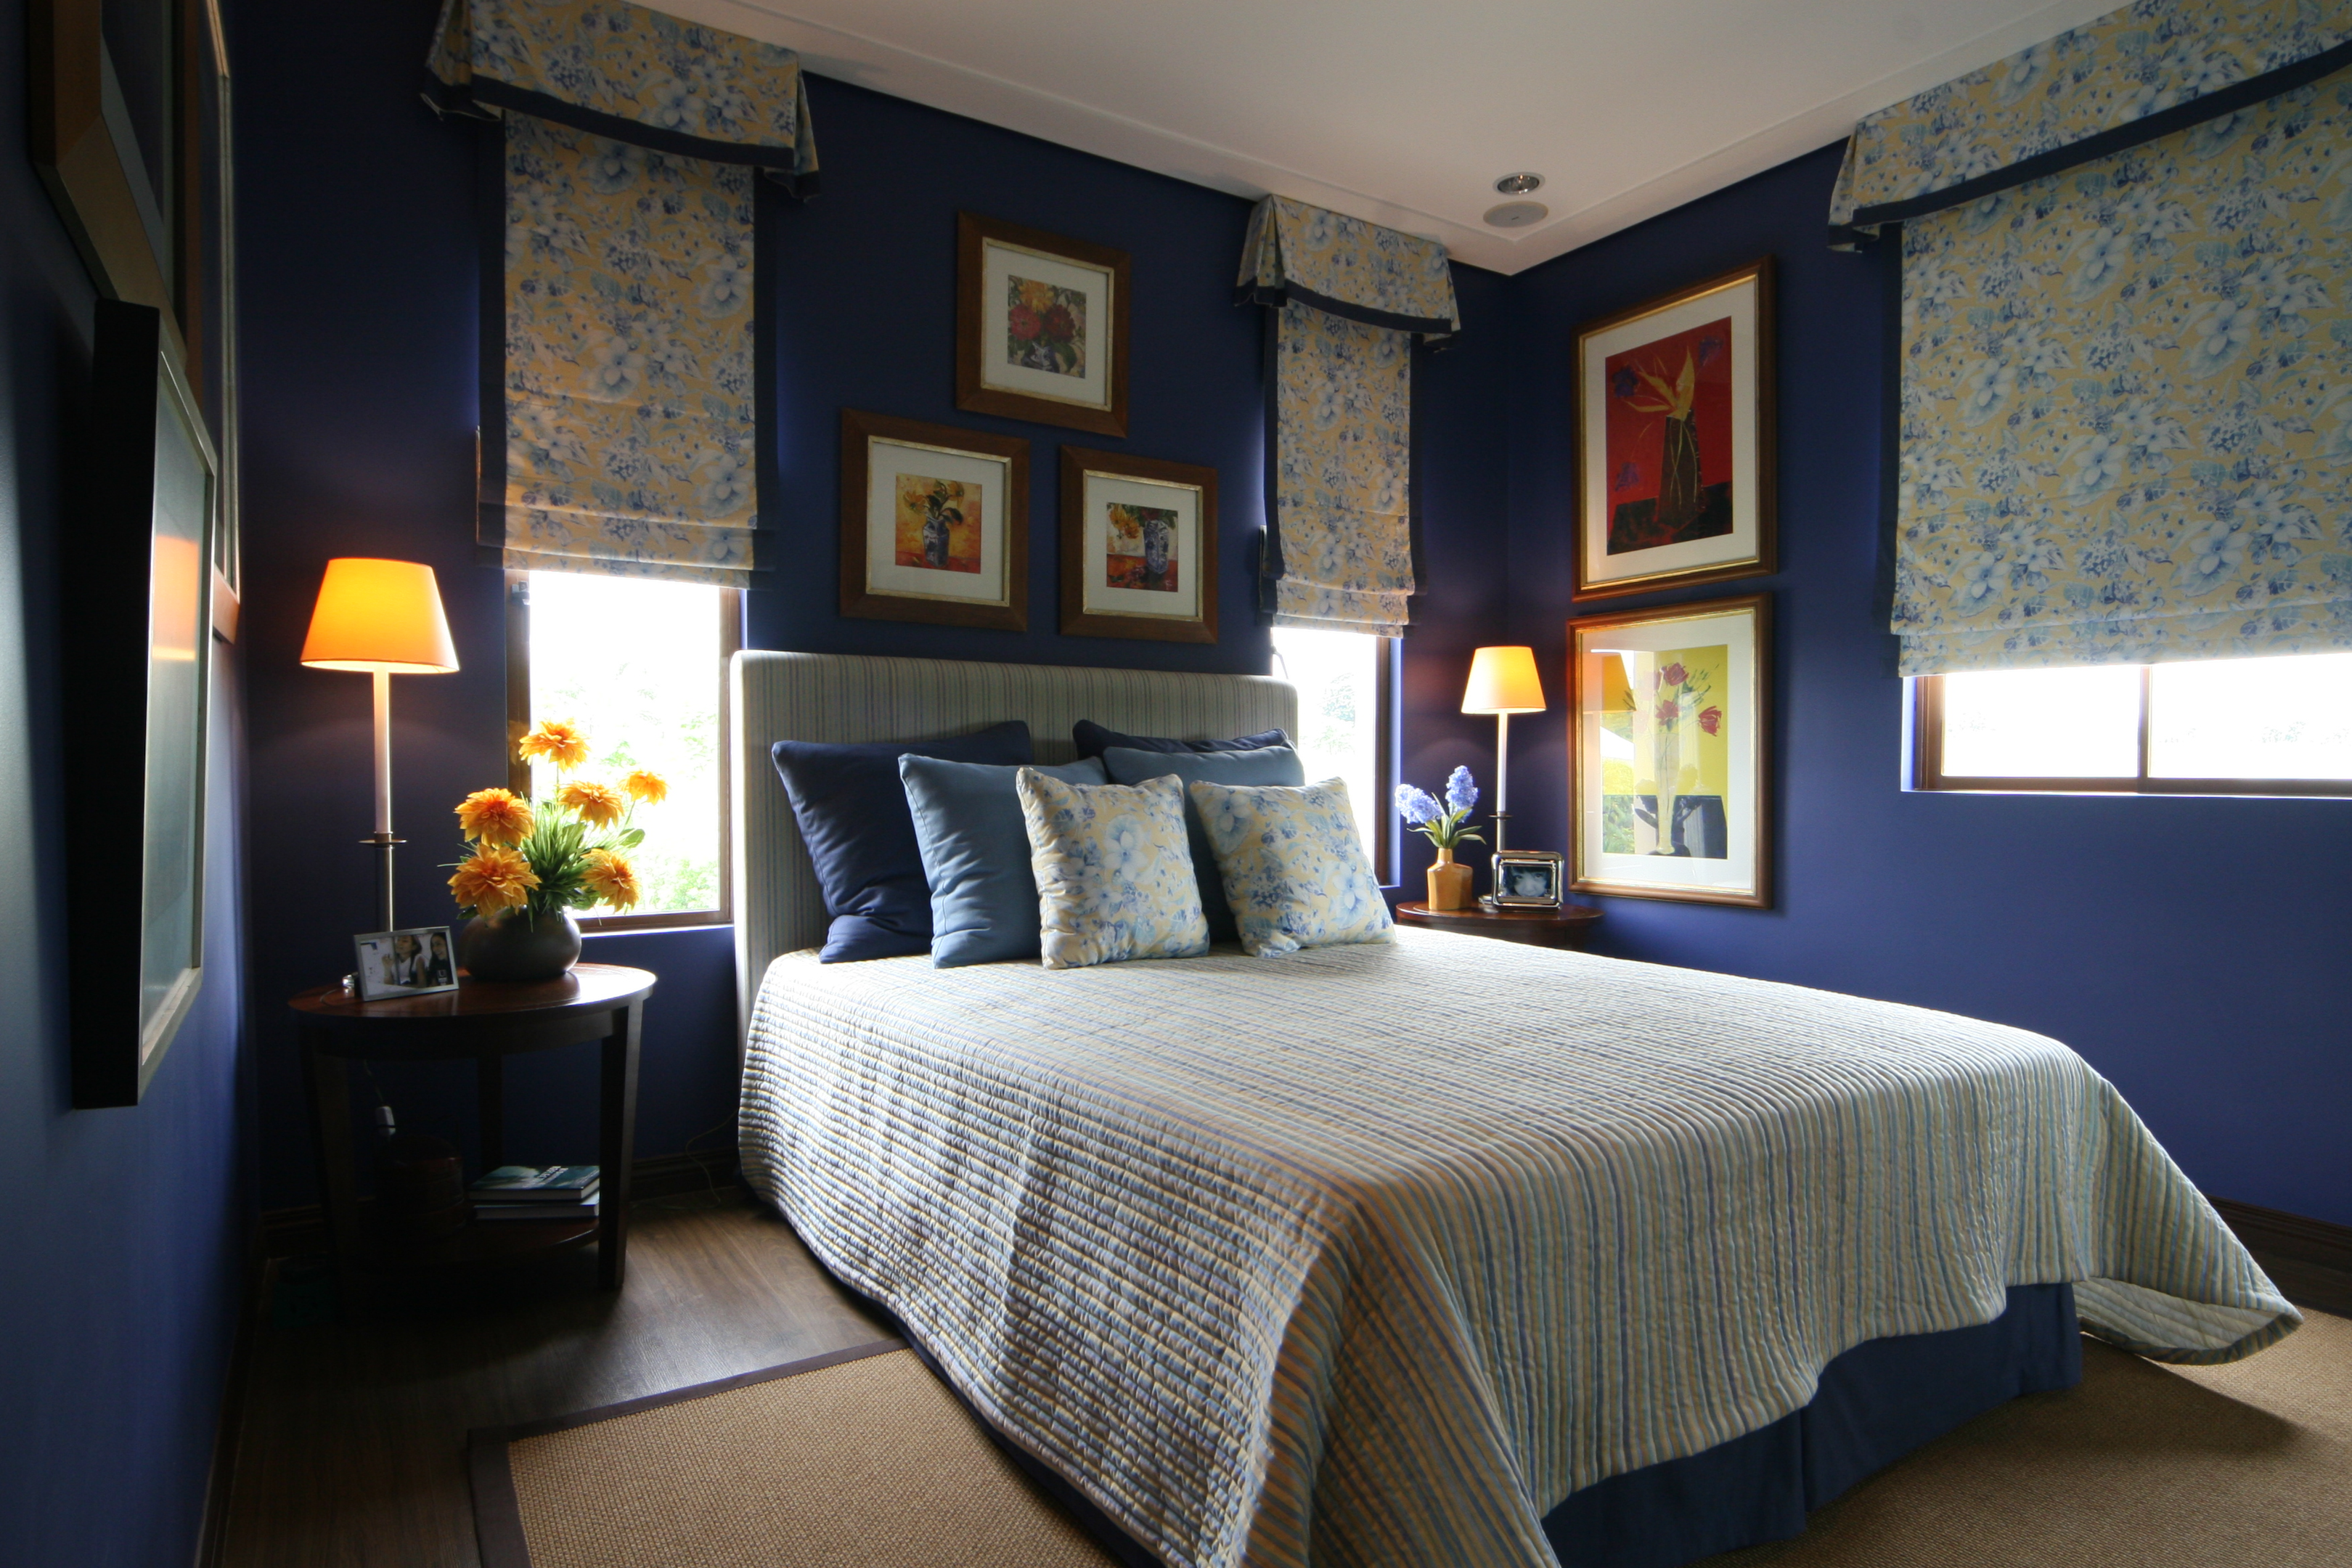 Image of a luxury bedroom with color blue paint